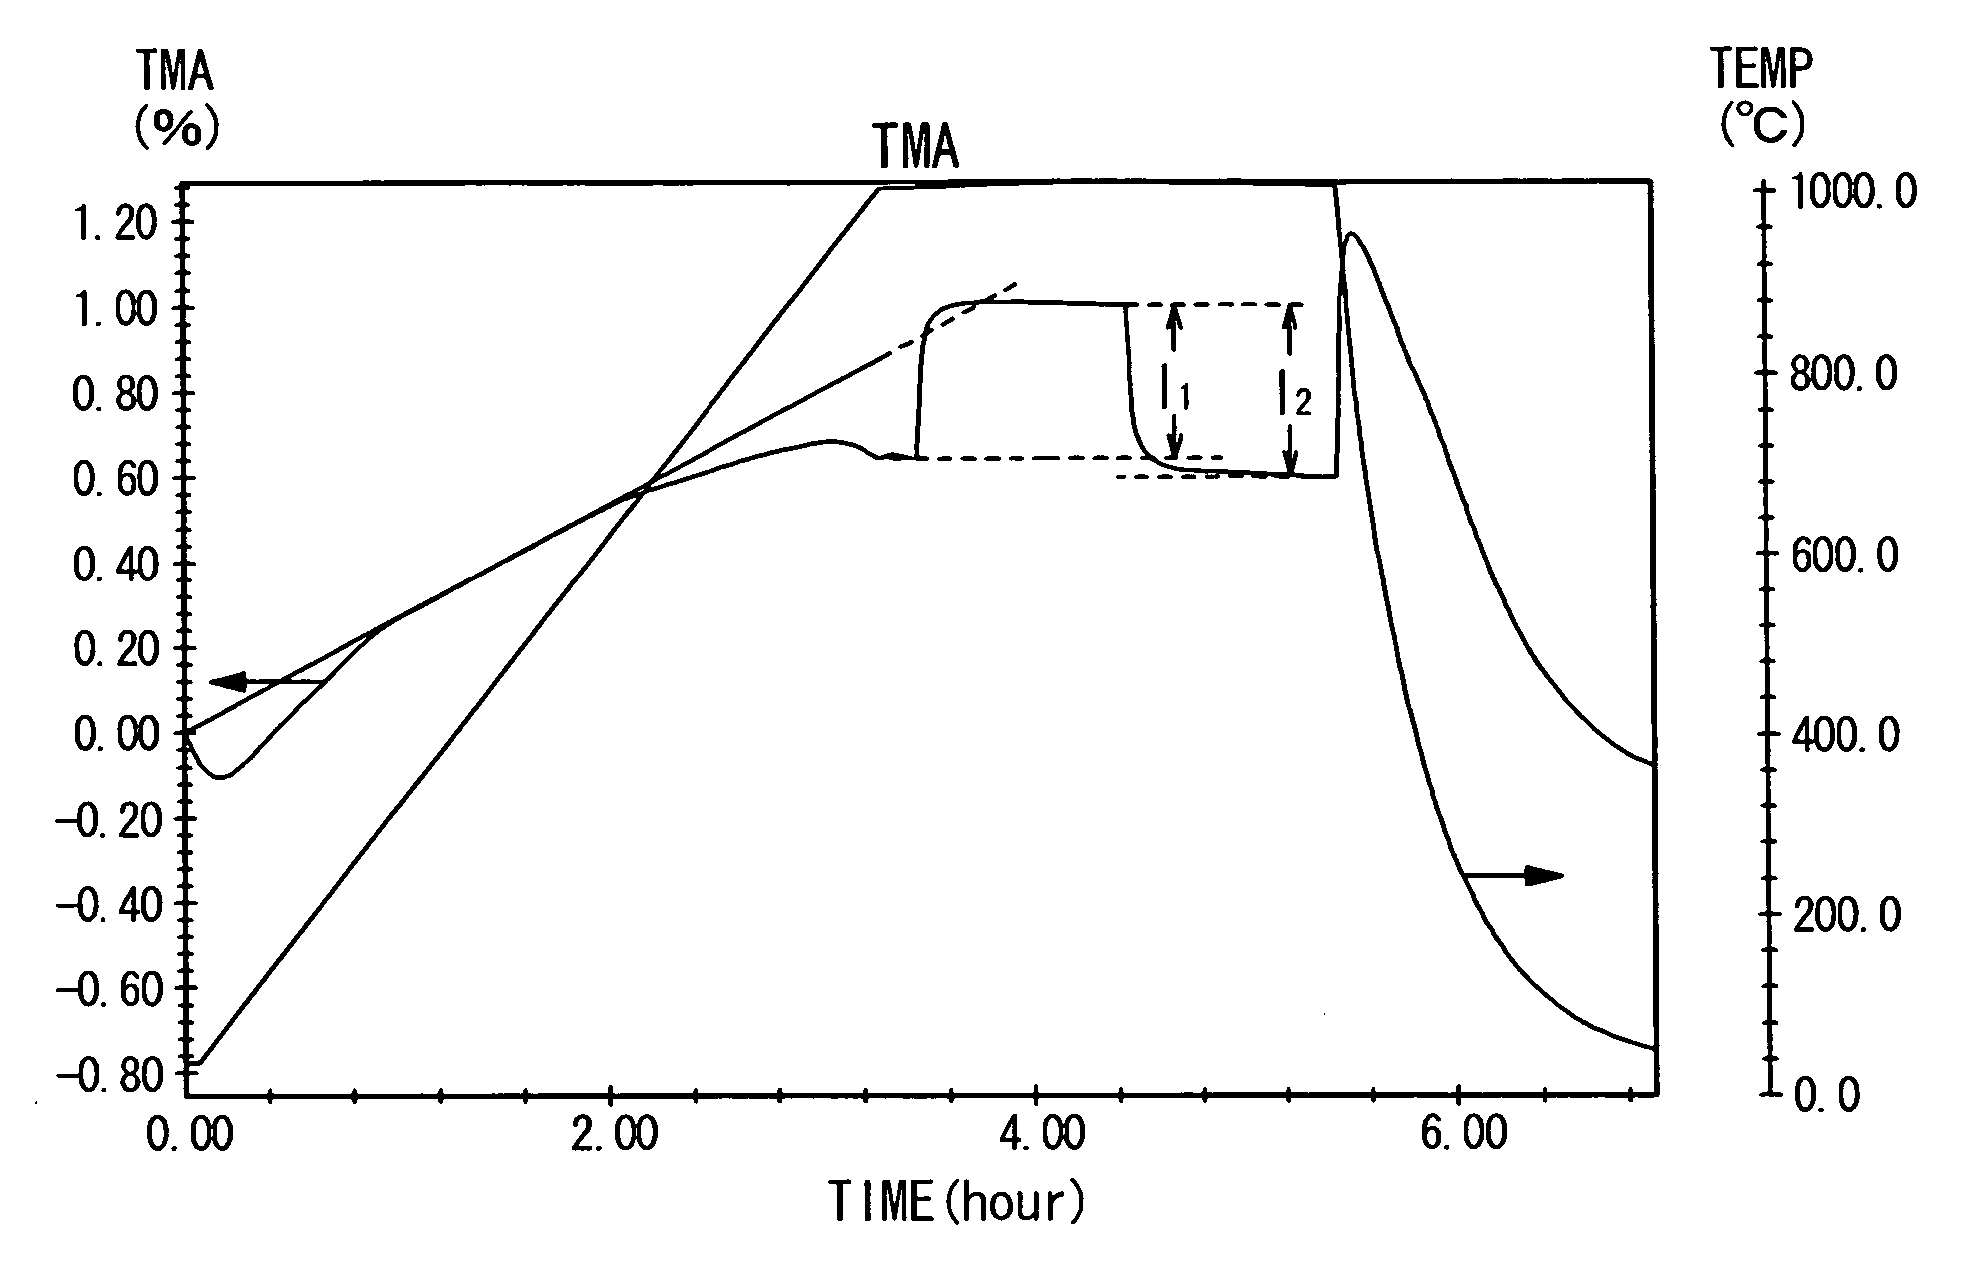 Fuel electrode material, a fuel electrode, and a solid oxide fuel cell